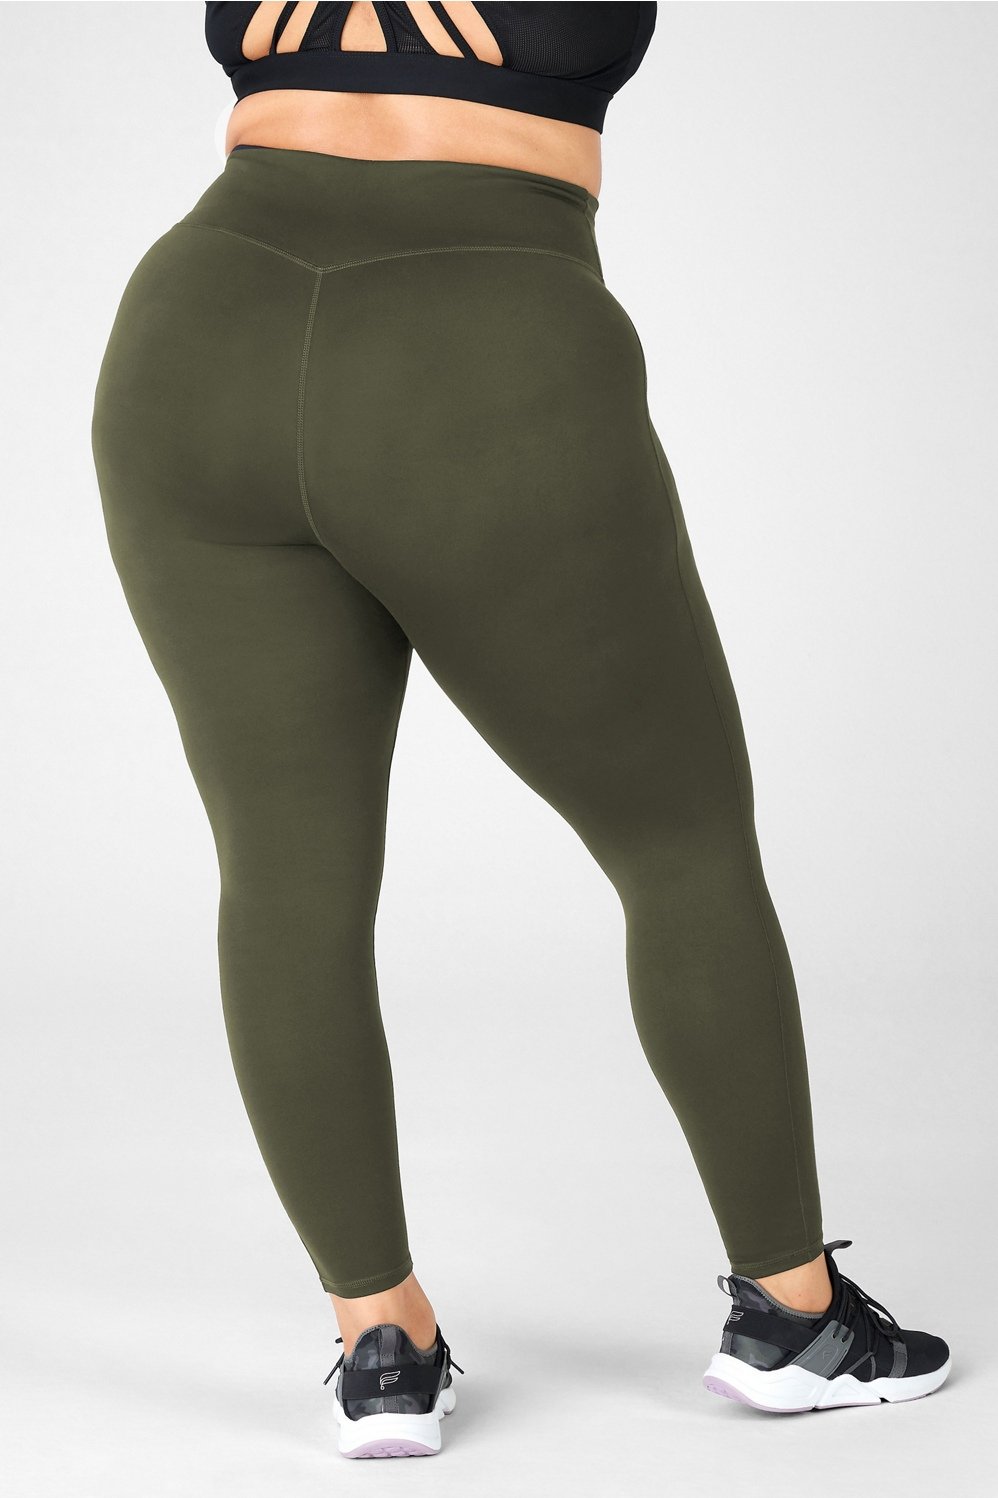 Women's High-waisted Classic Leggings - Wild Fable™ Deep Olive Xxl